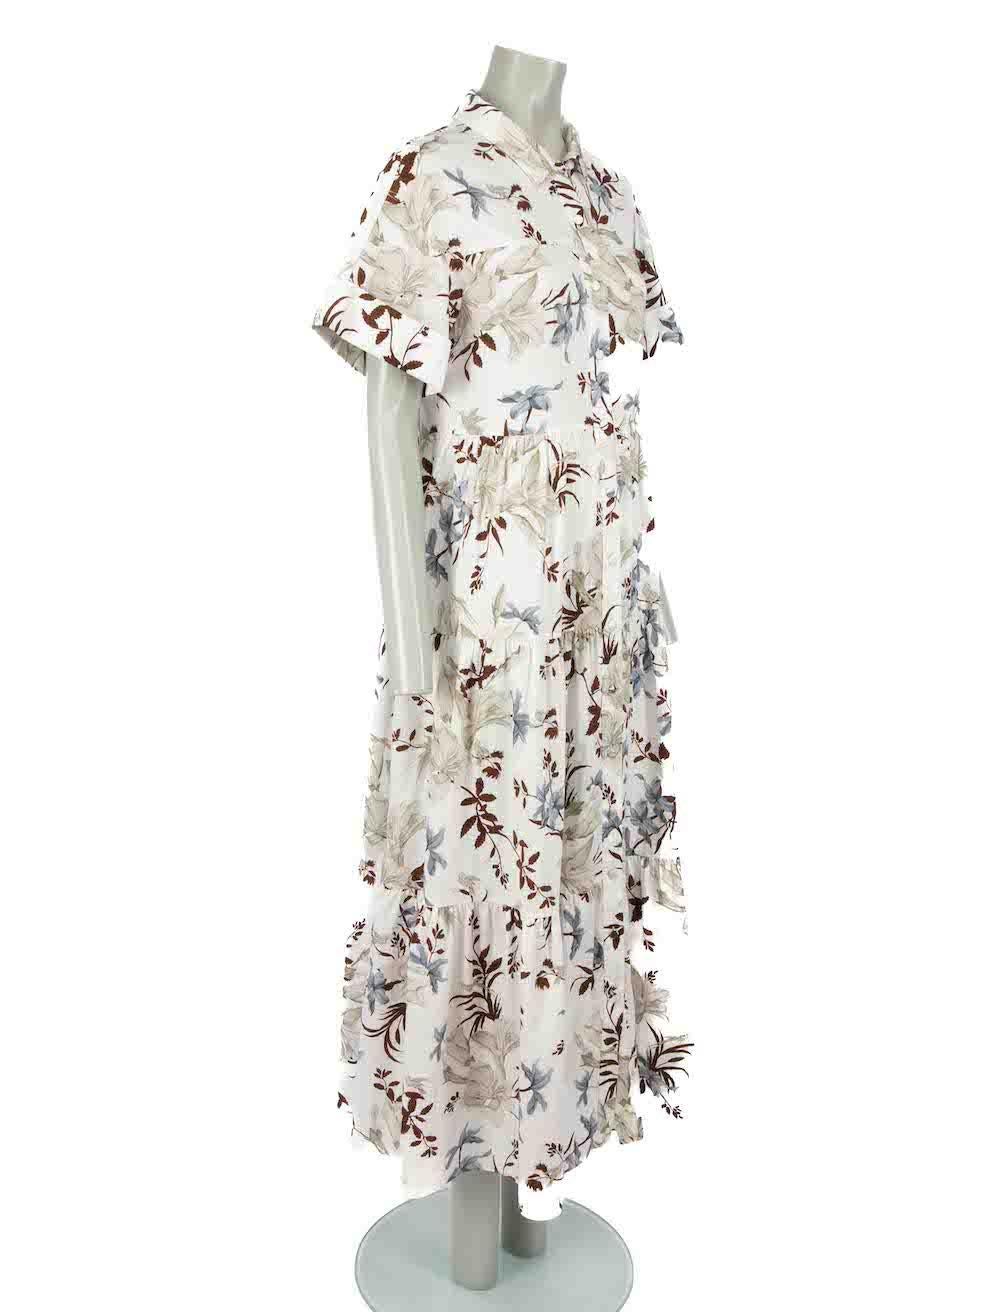 CONDITION is Good. Minor wear to dress is evident. Light wear to fabric surface through the skirt where a number of light discoloured marks are found on this used Erdem designer resale item.

Details
White
Cotton
Shirt dress
Floral pattern
Tiered